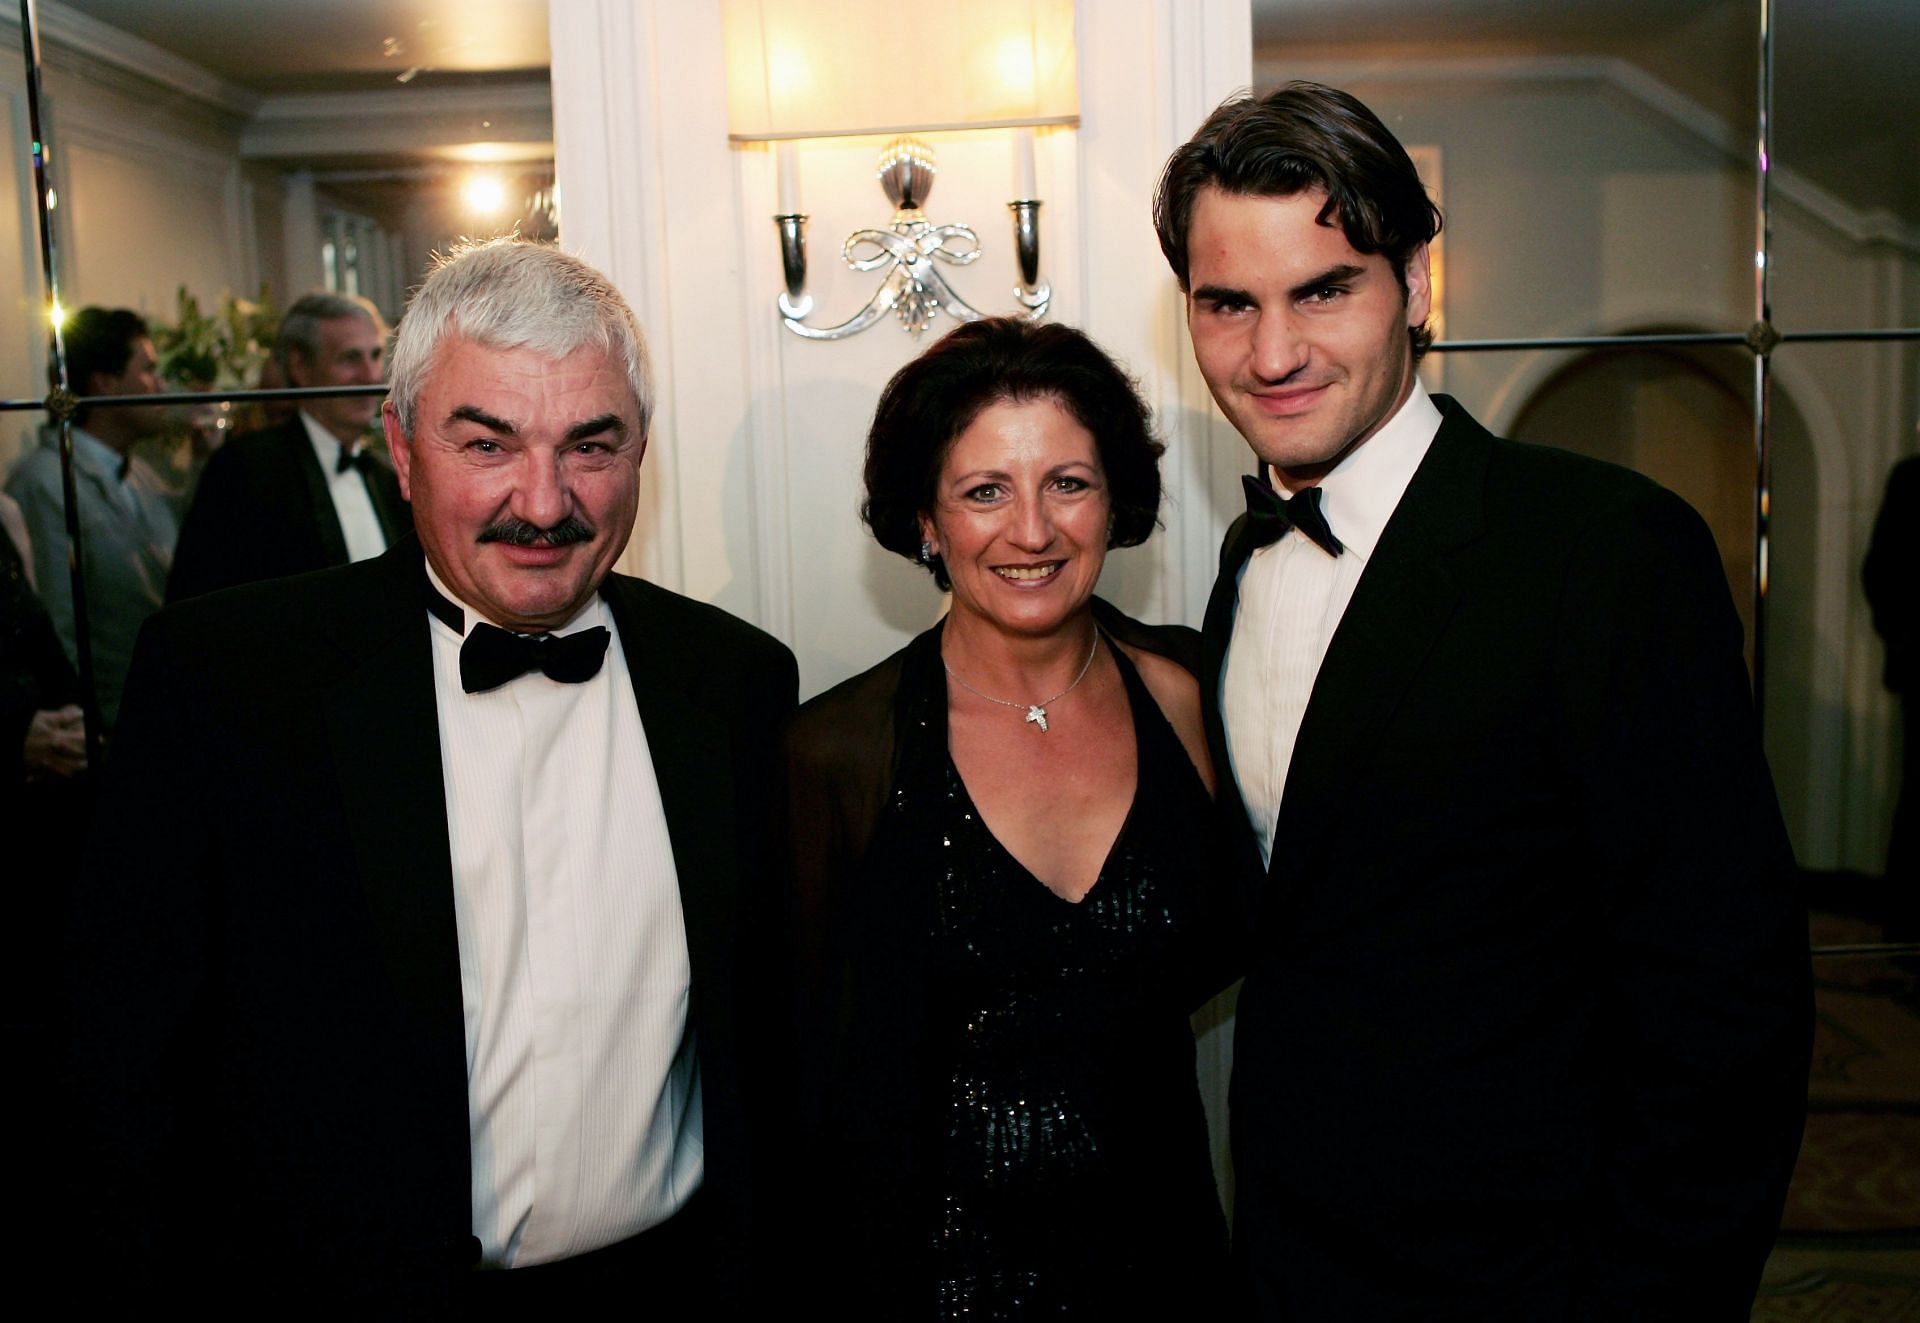 Roger Federer poses with his parents during 2005 Wimbledon Winners Dinner